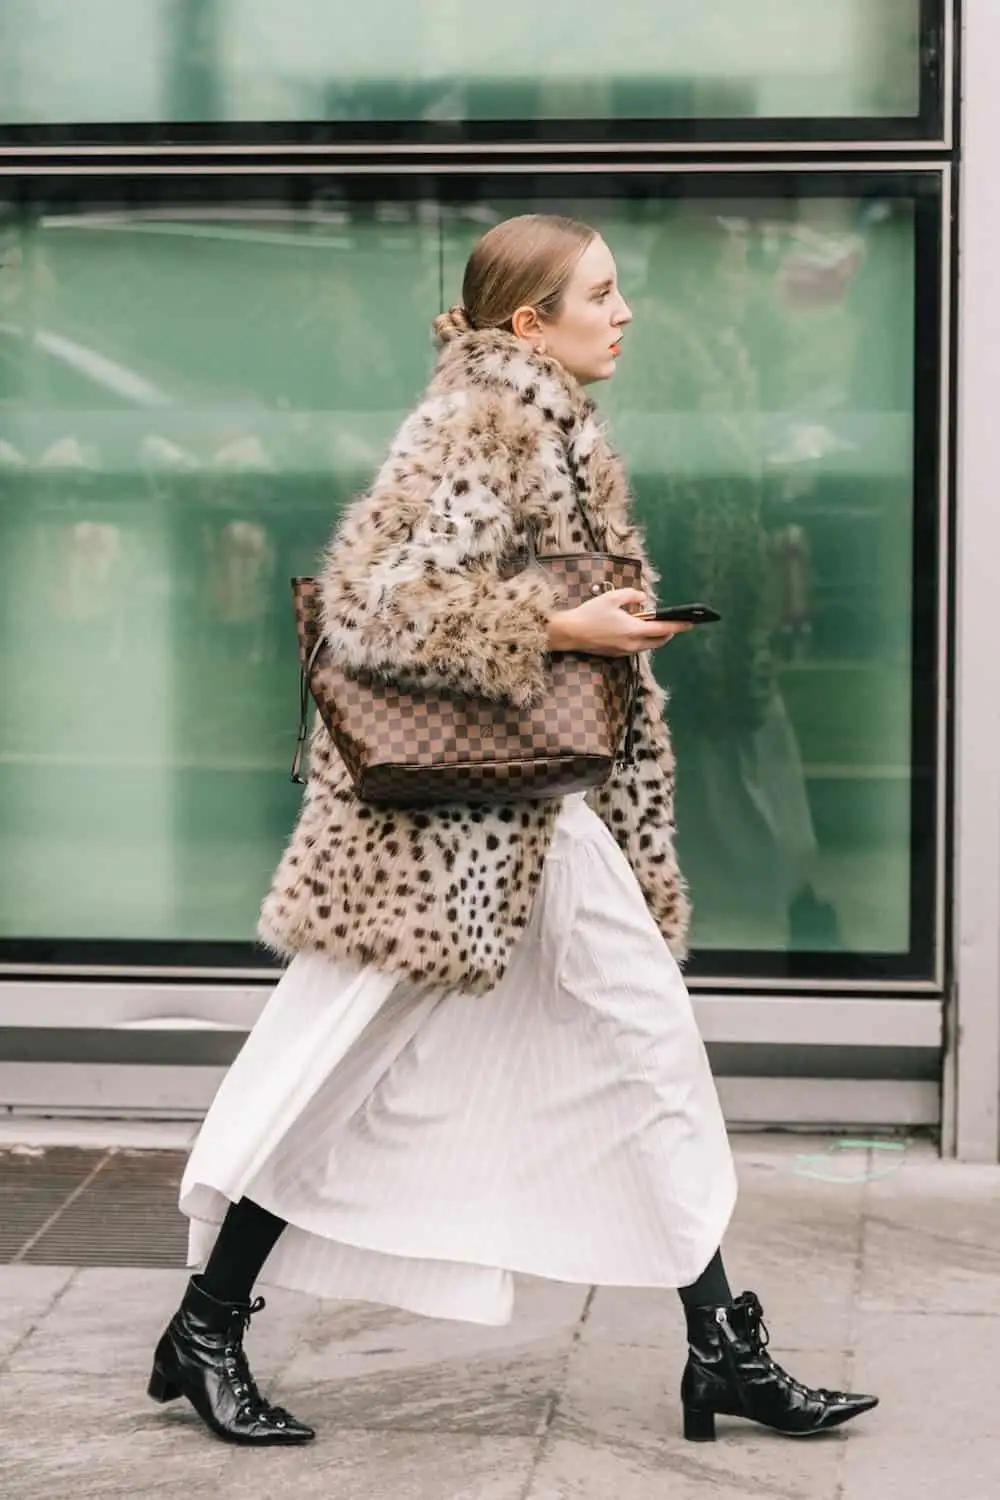 Cheetah Print Vs Leopard Print: Understand the Difference for Your Next Outfit